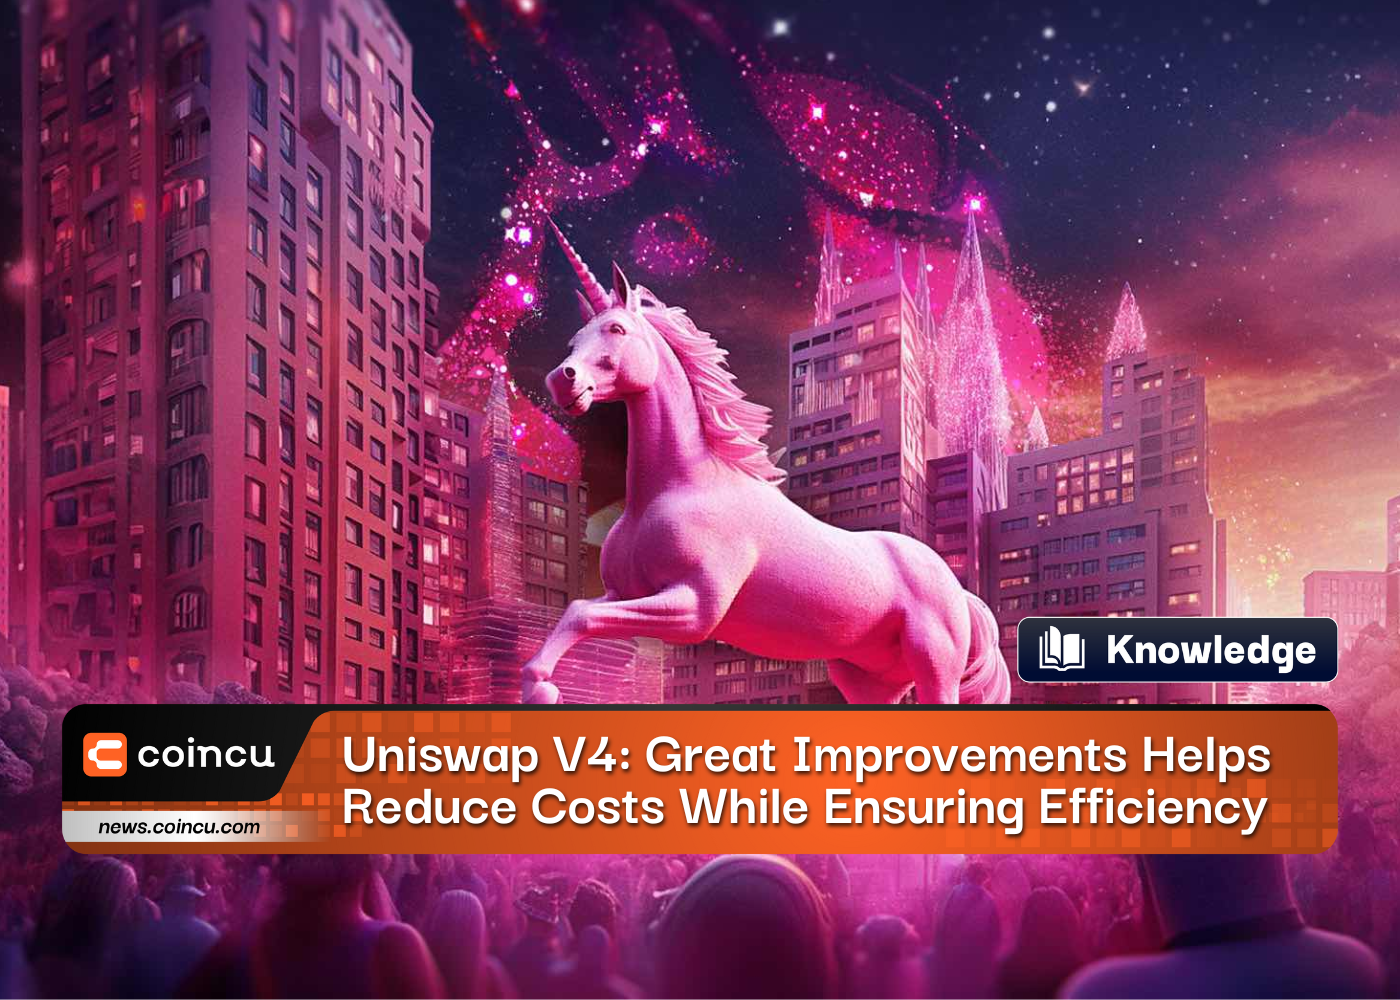 Uniswap V4: Great Improvements Helps Reduce Costs While Ensuring Efficiency